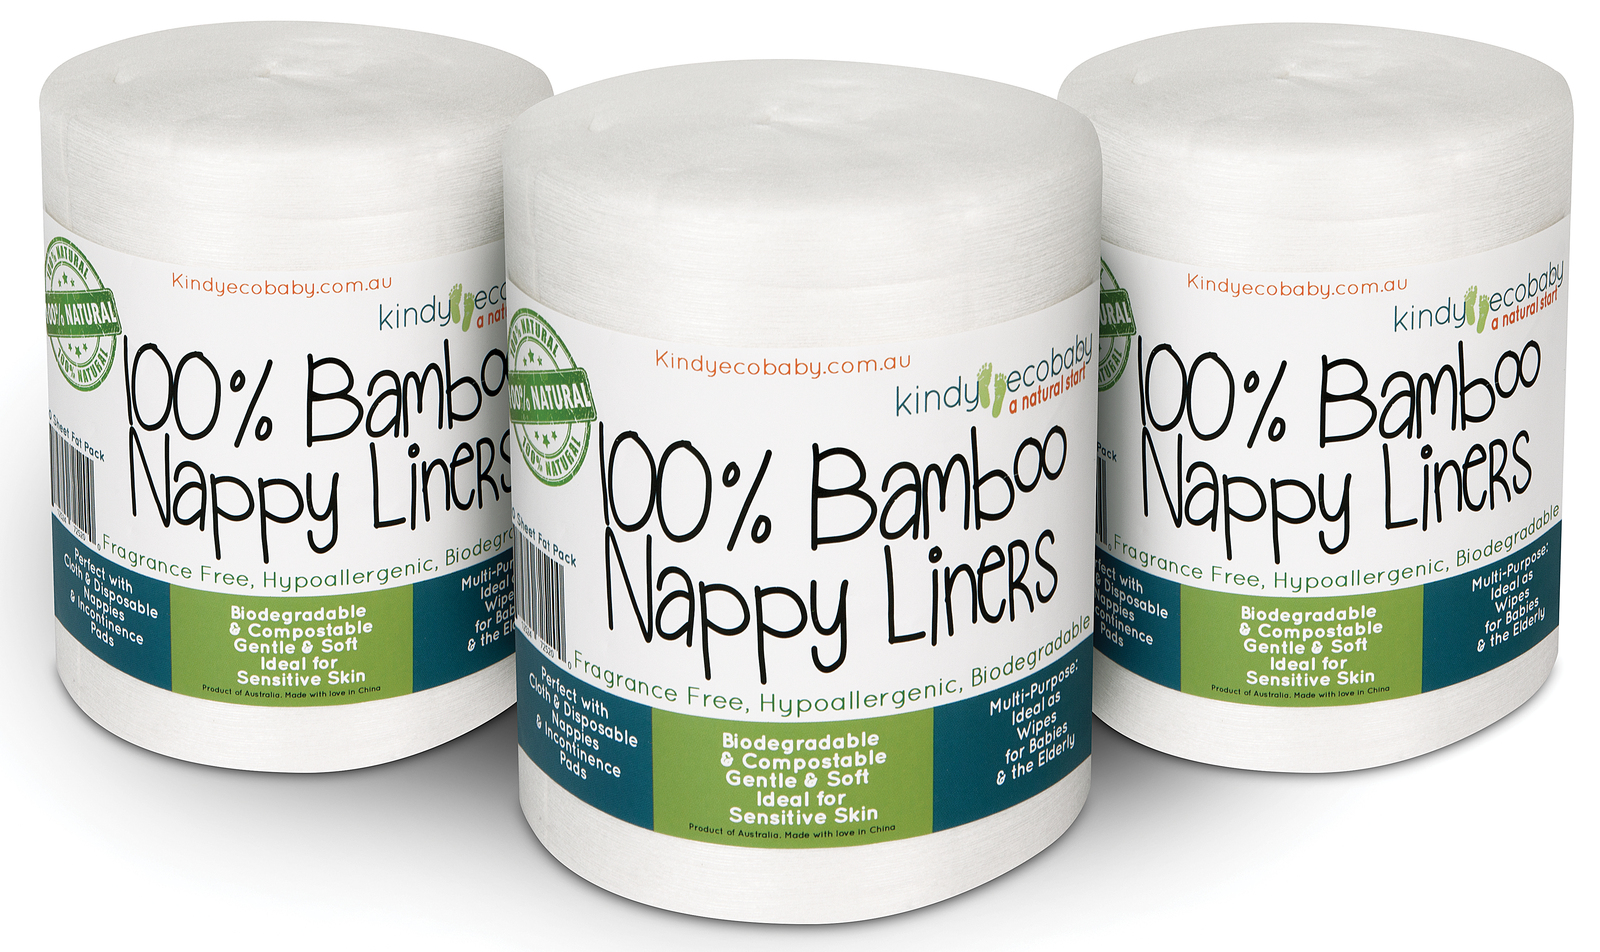 Pack of Kindy Ecobaby Bamboo Nappy Liners, showcasing 7 rolls with 250 sheets each, highlighting their biodegradable and hypoallergenic properties